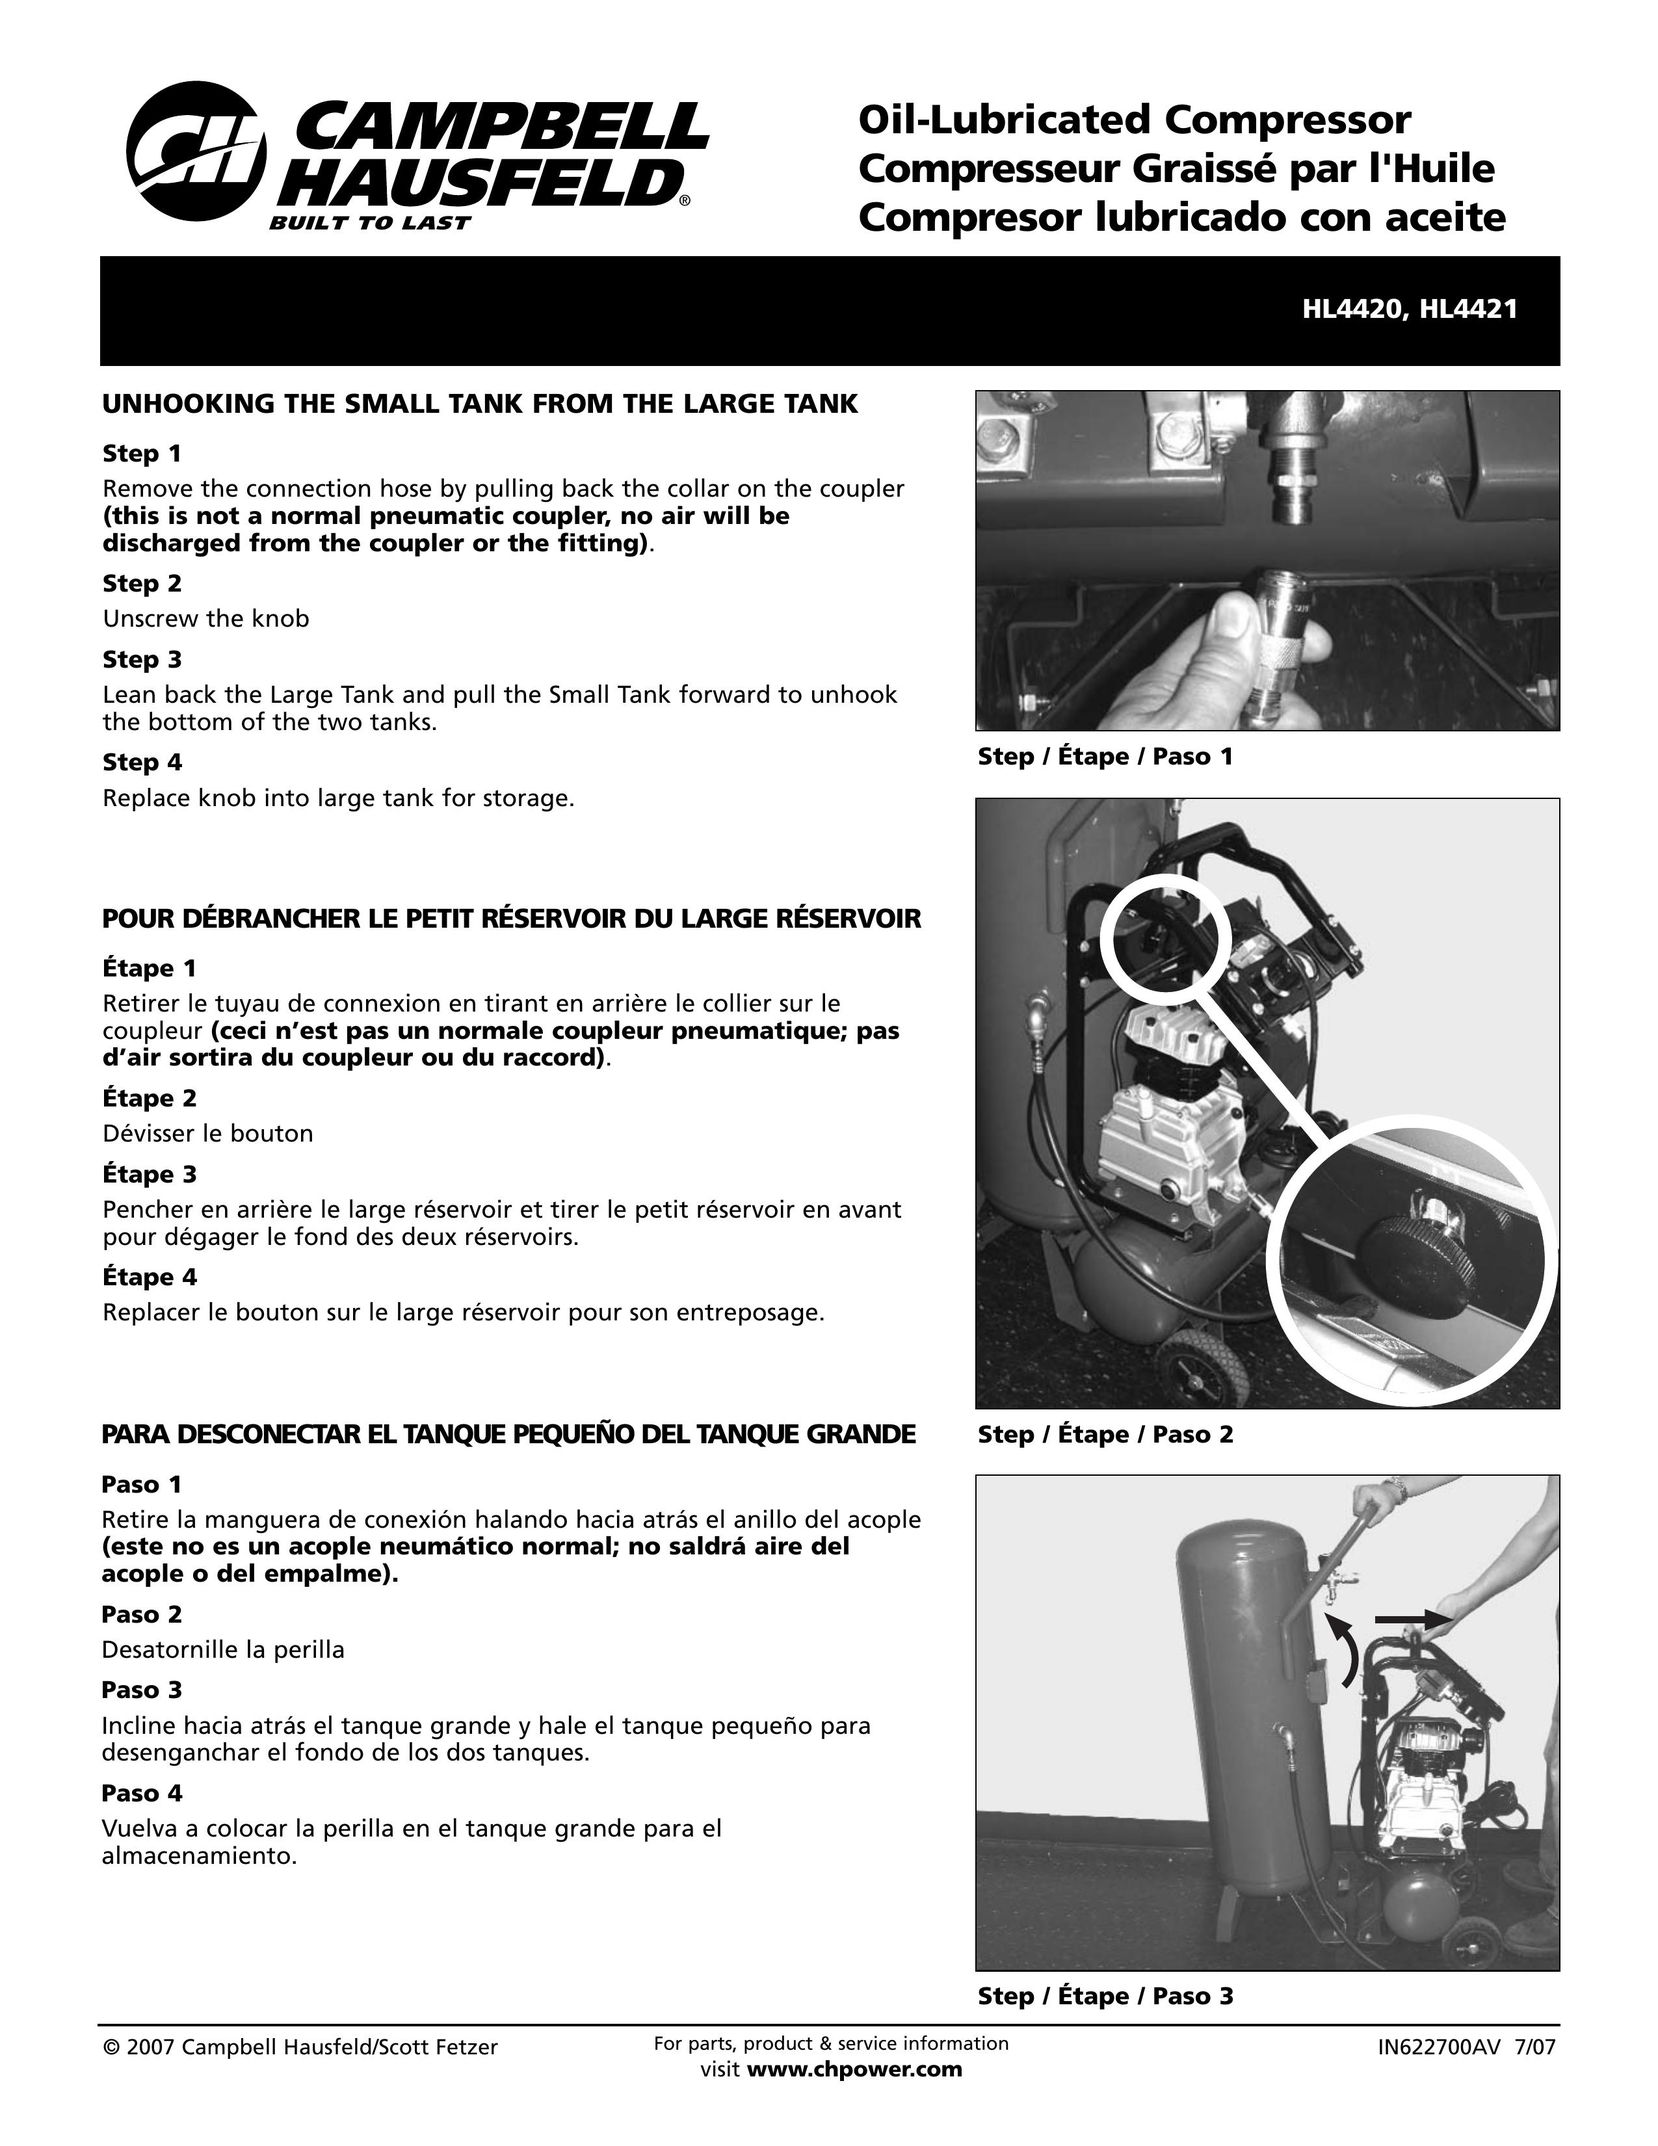 Campbell Hausfeld HL4420 Corded Headset User Manual (Page 1)